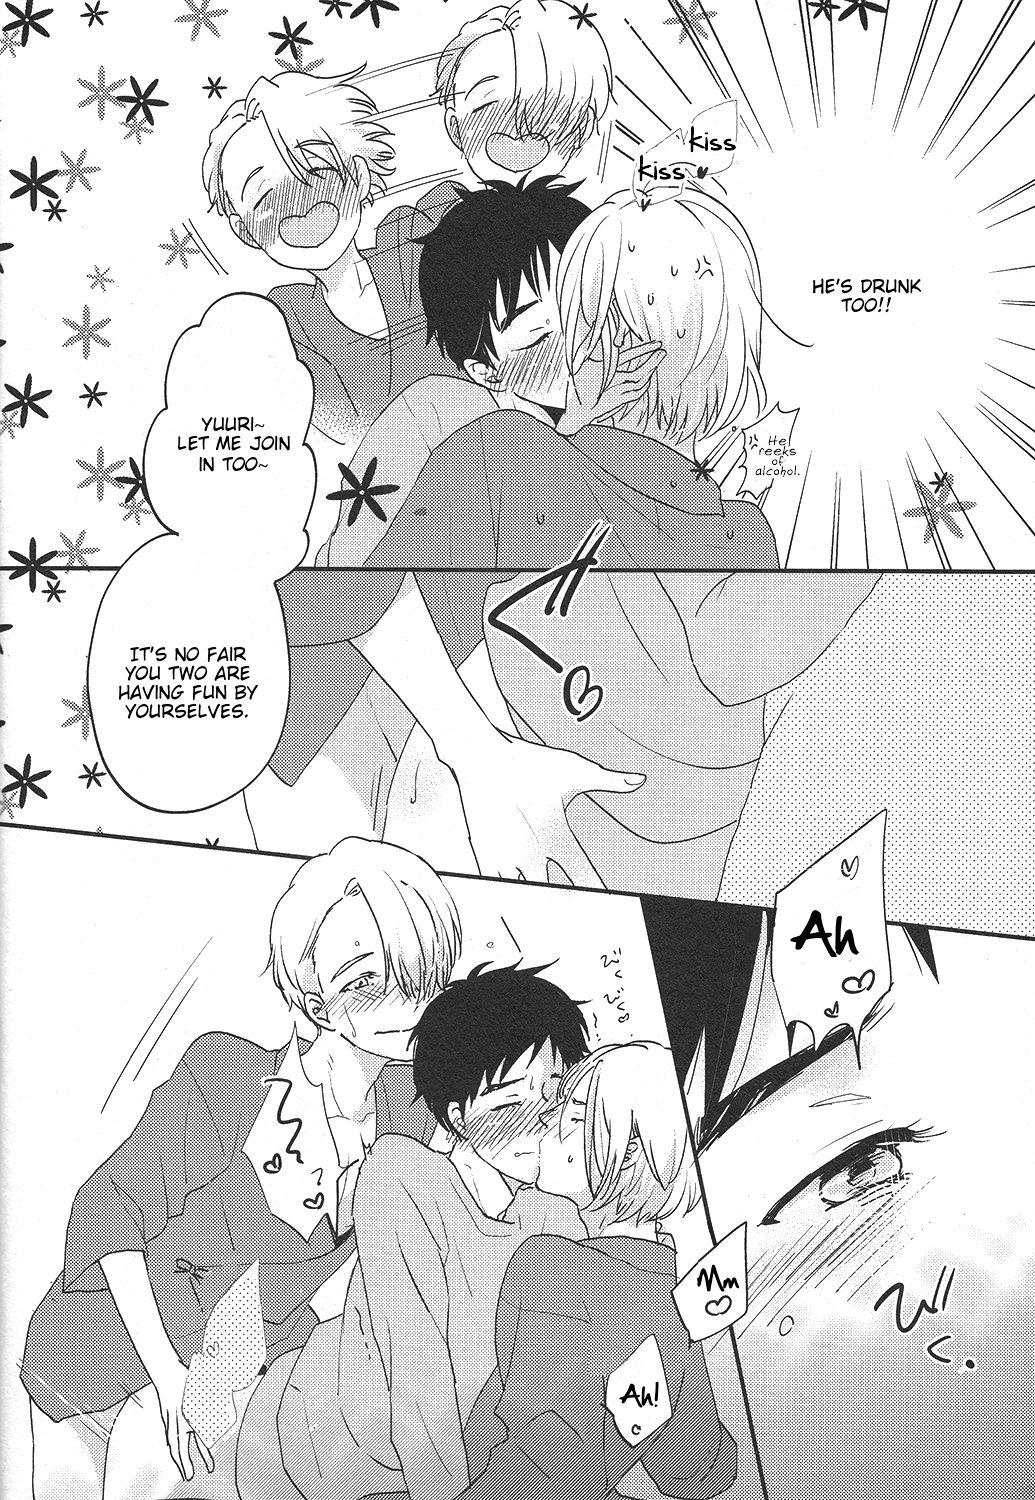 Hot Teen TAKE ME NOW! - Yuri on ice Male - Page 6